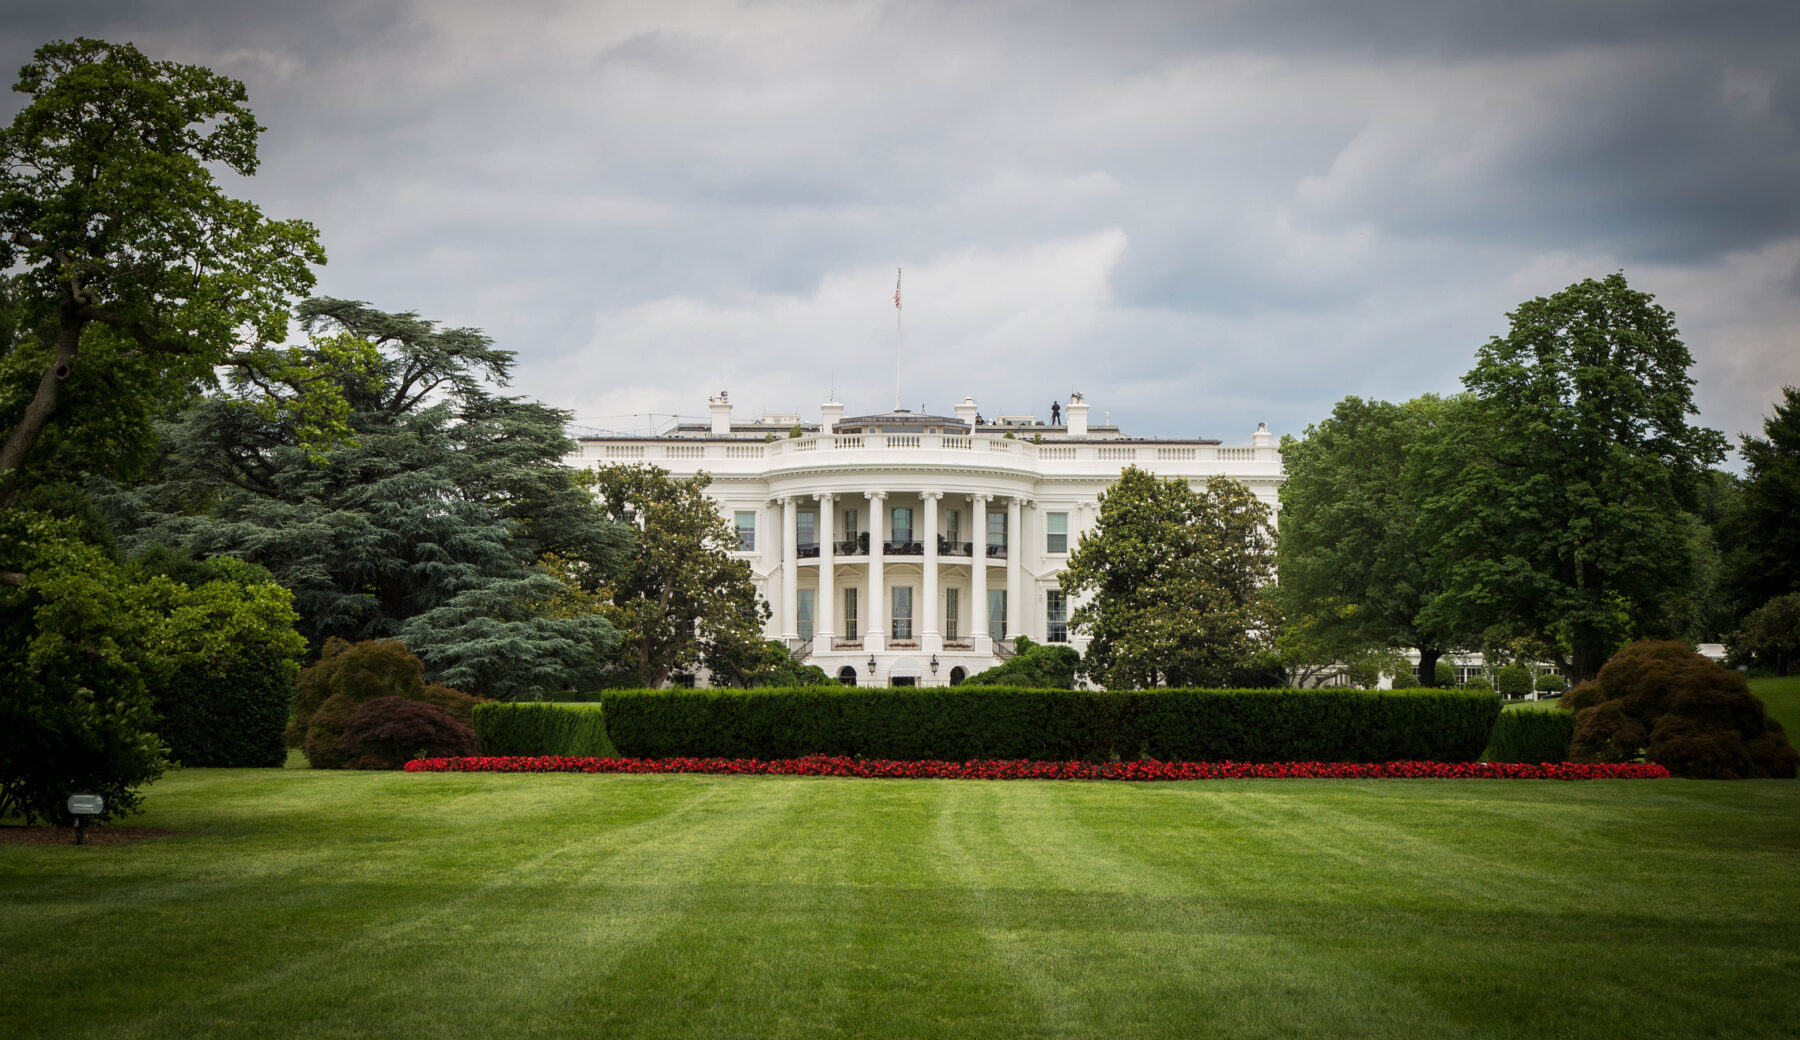 a photo of the White House across the lawn